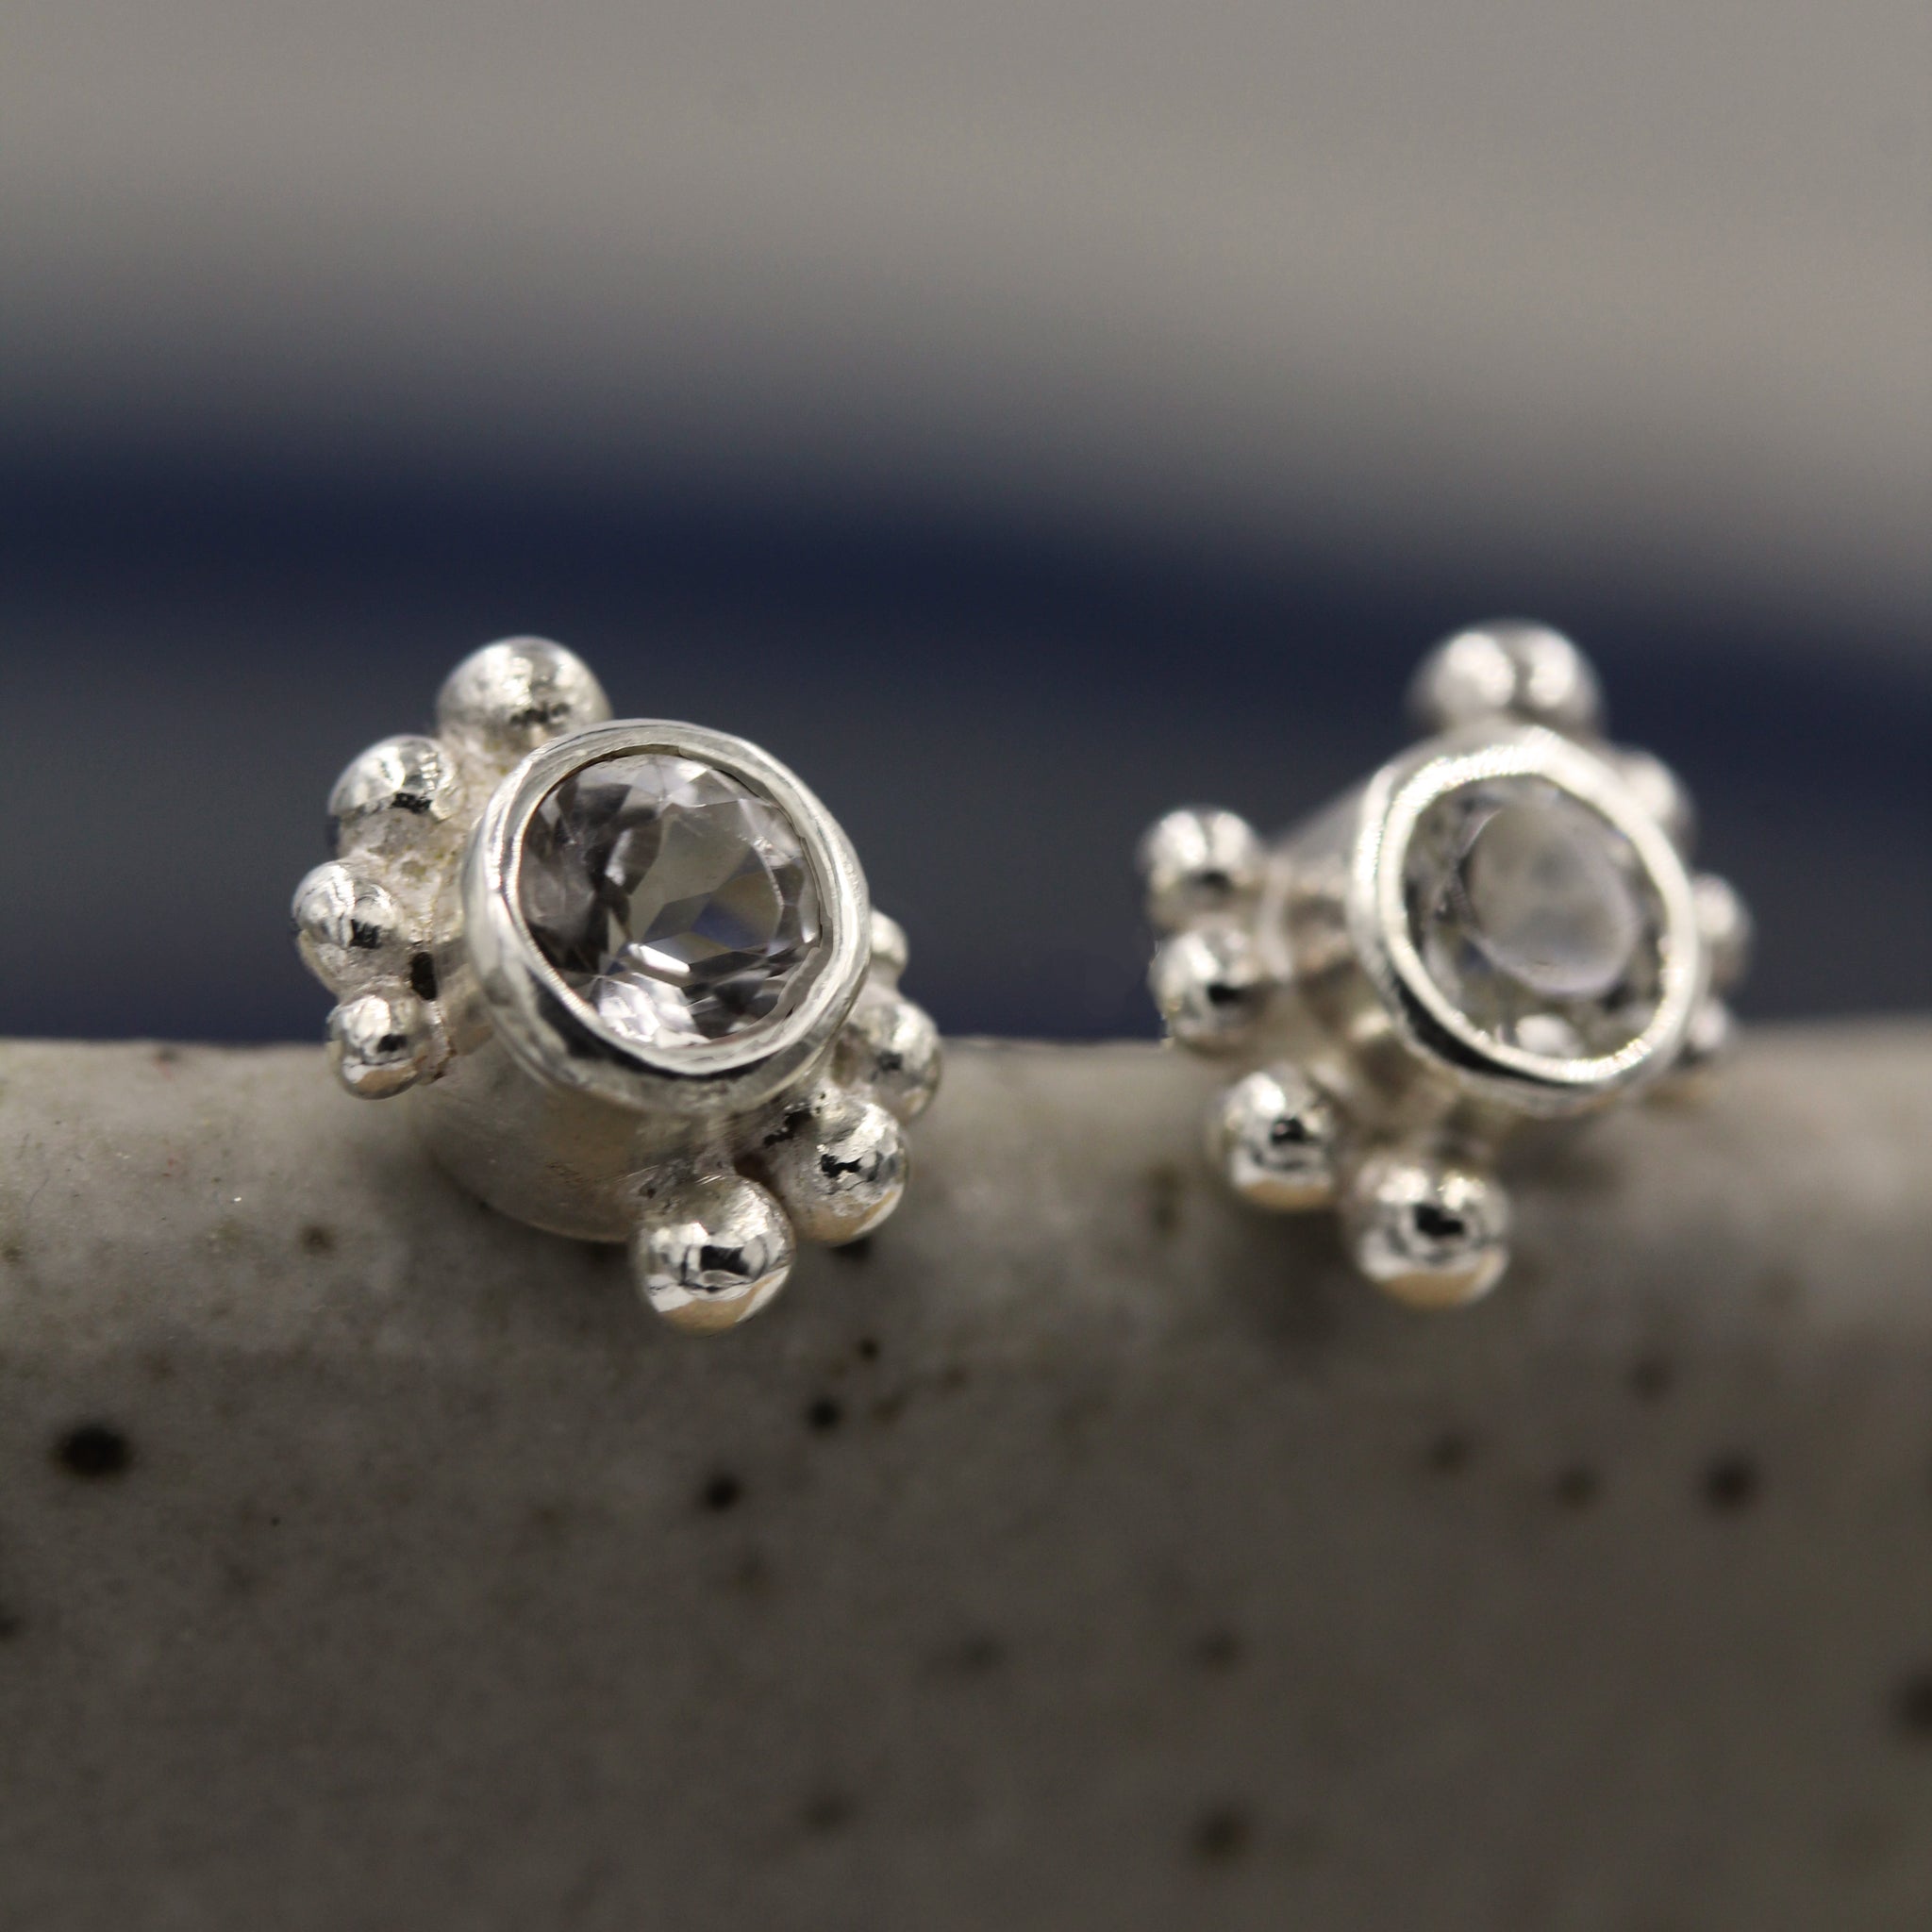 Handmade sea inspired earrings, made in 100% recycled silver and white topaz